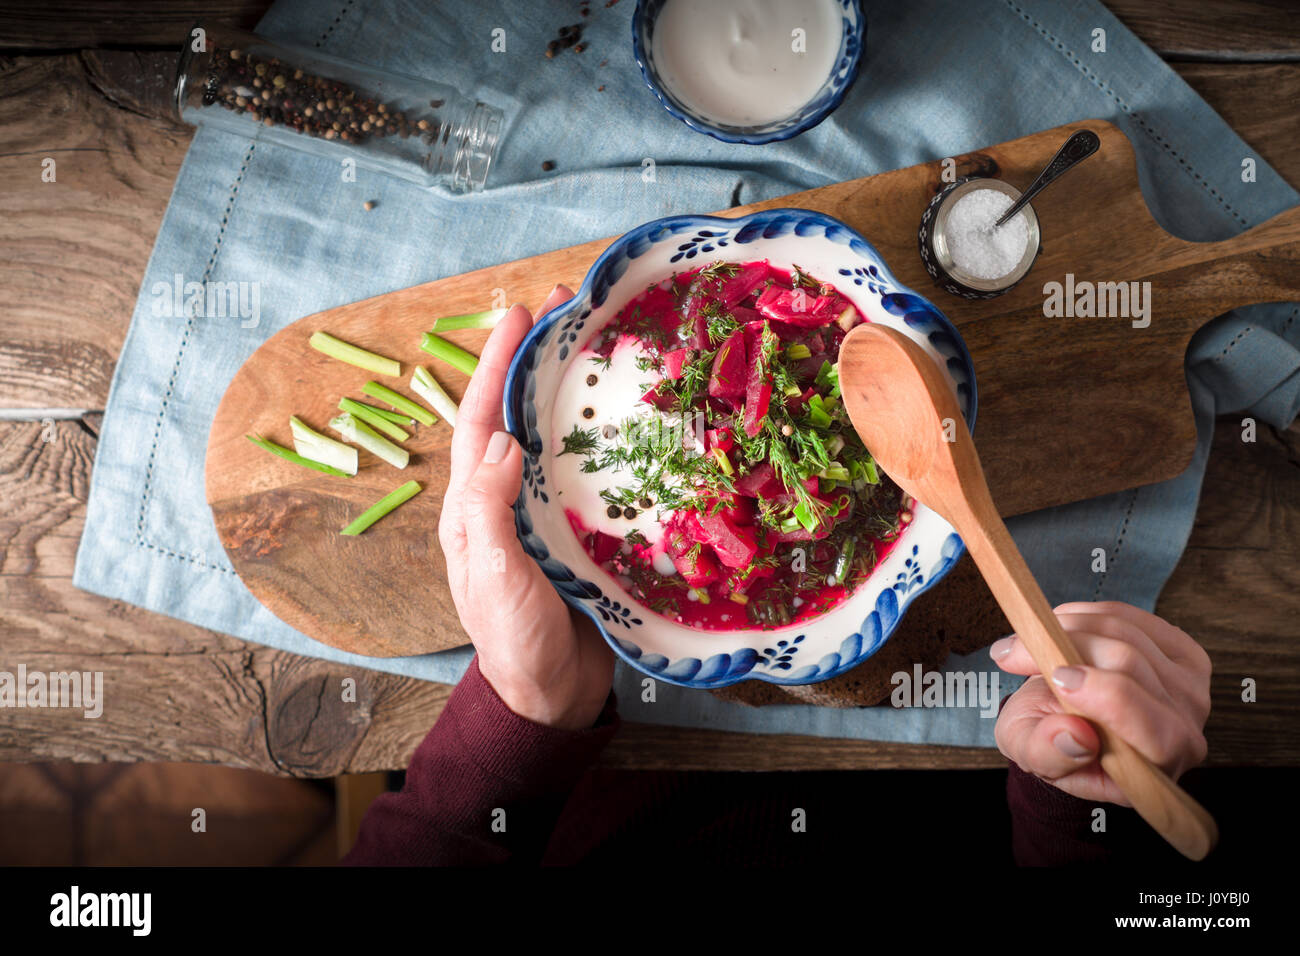 Eating borscht from ceramic plate top view Stock Photo